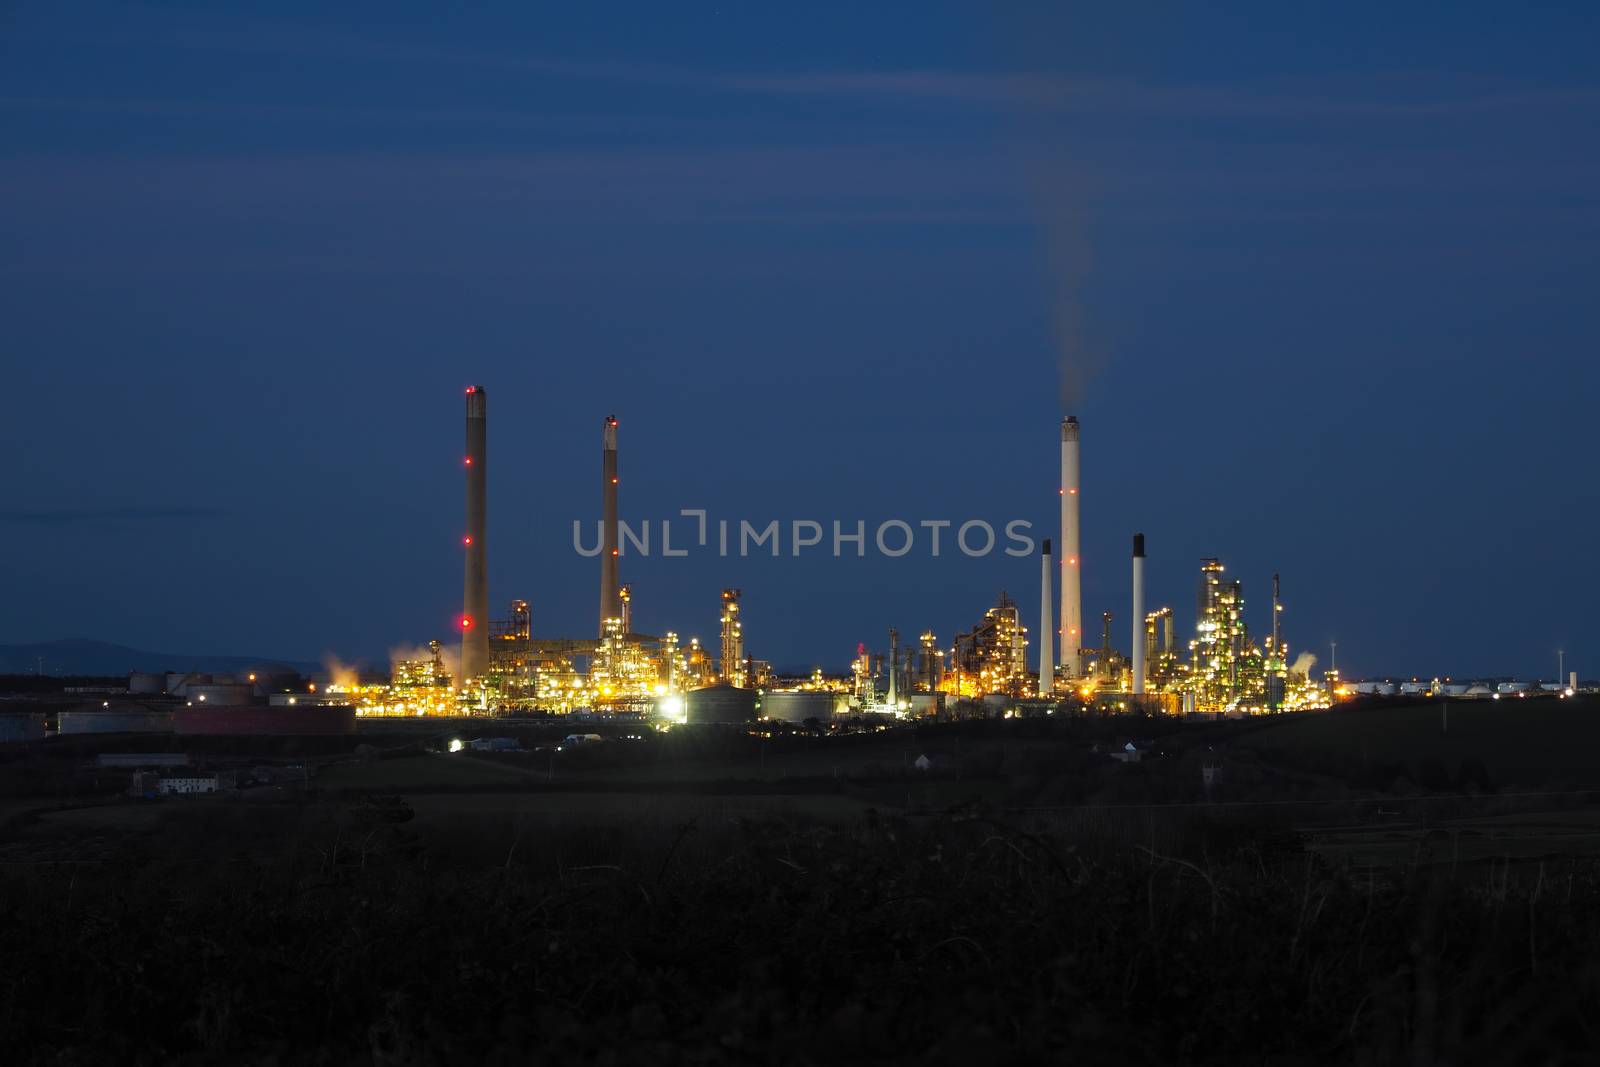 Pembroke oil refinery at night, across from Milford Haven, Pembrokeshire, Wales by PhilHarland